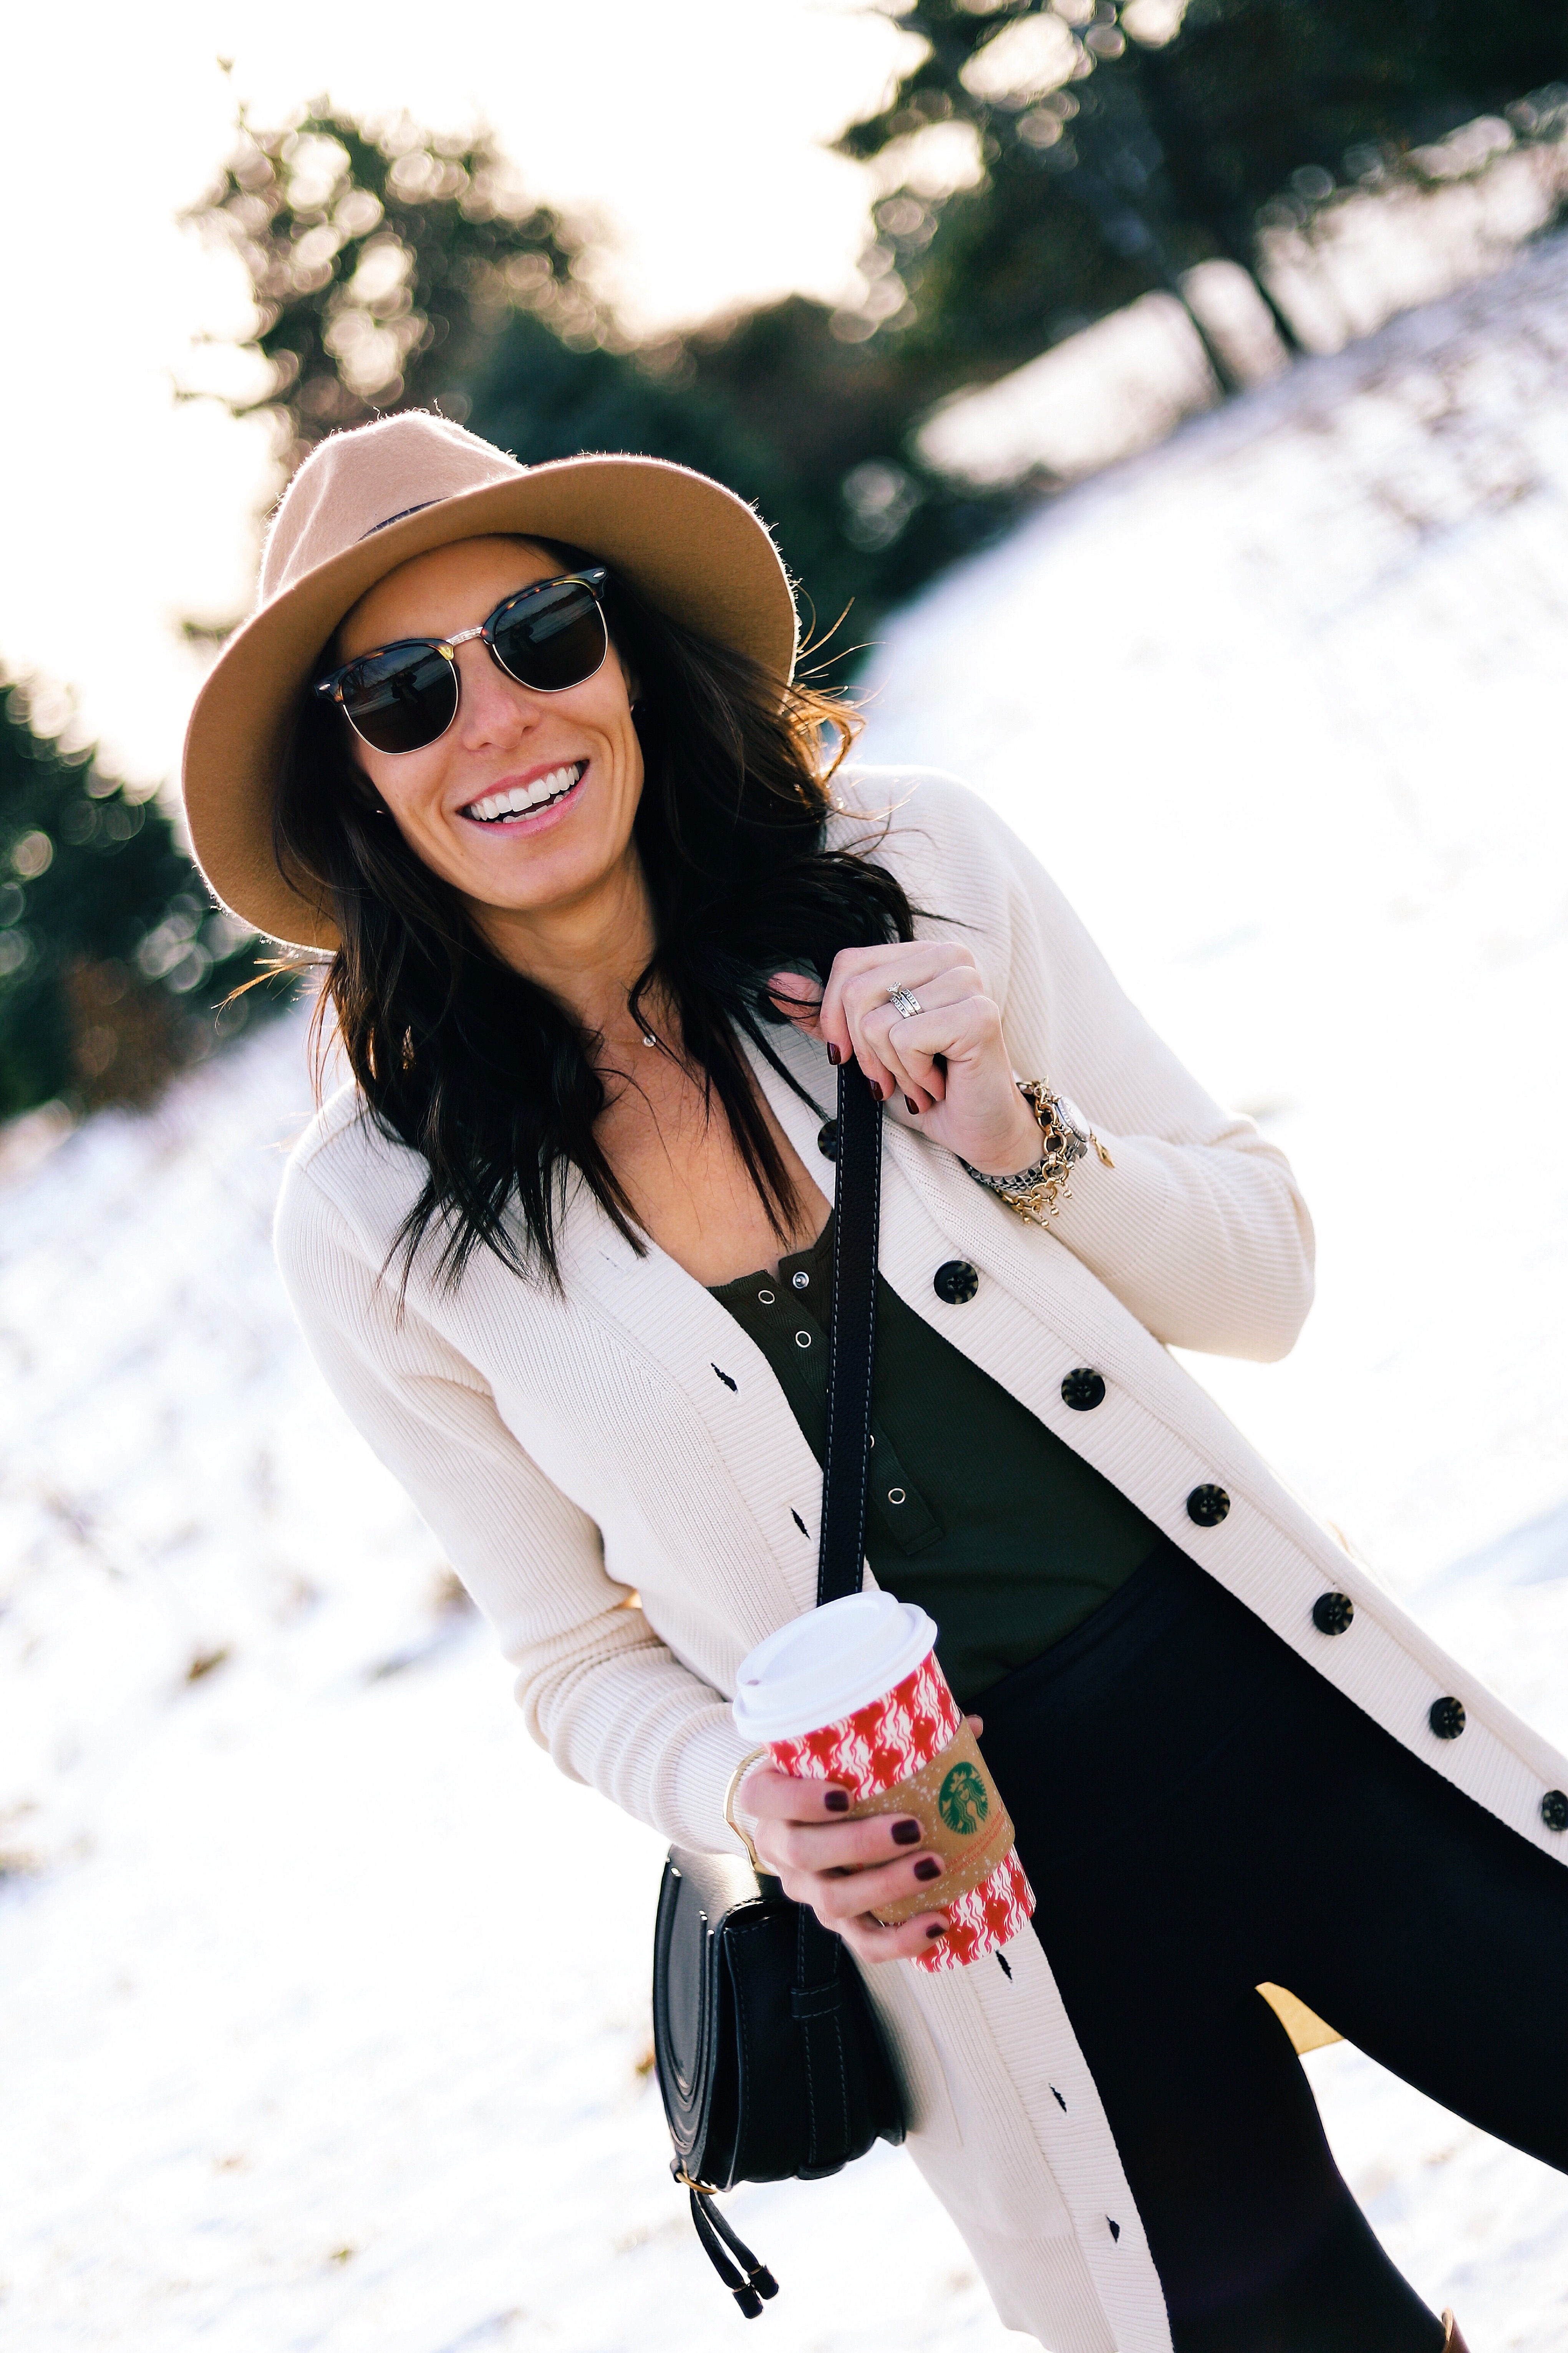 Duster Cardigan Sweater Target Button Down Spanx Leggings Revolve Olive Bodysuit Urban Outfitters Hat Knee High Boots Target Clubmaster Sunglasses Chloe Mini Bag